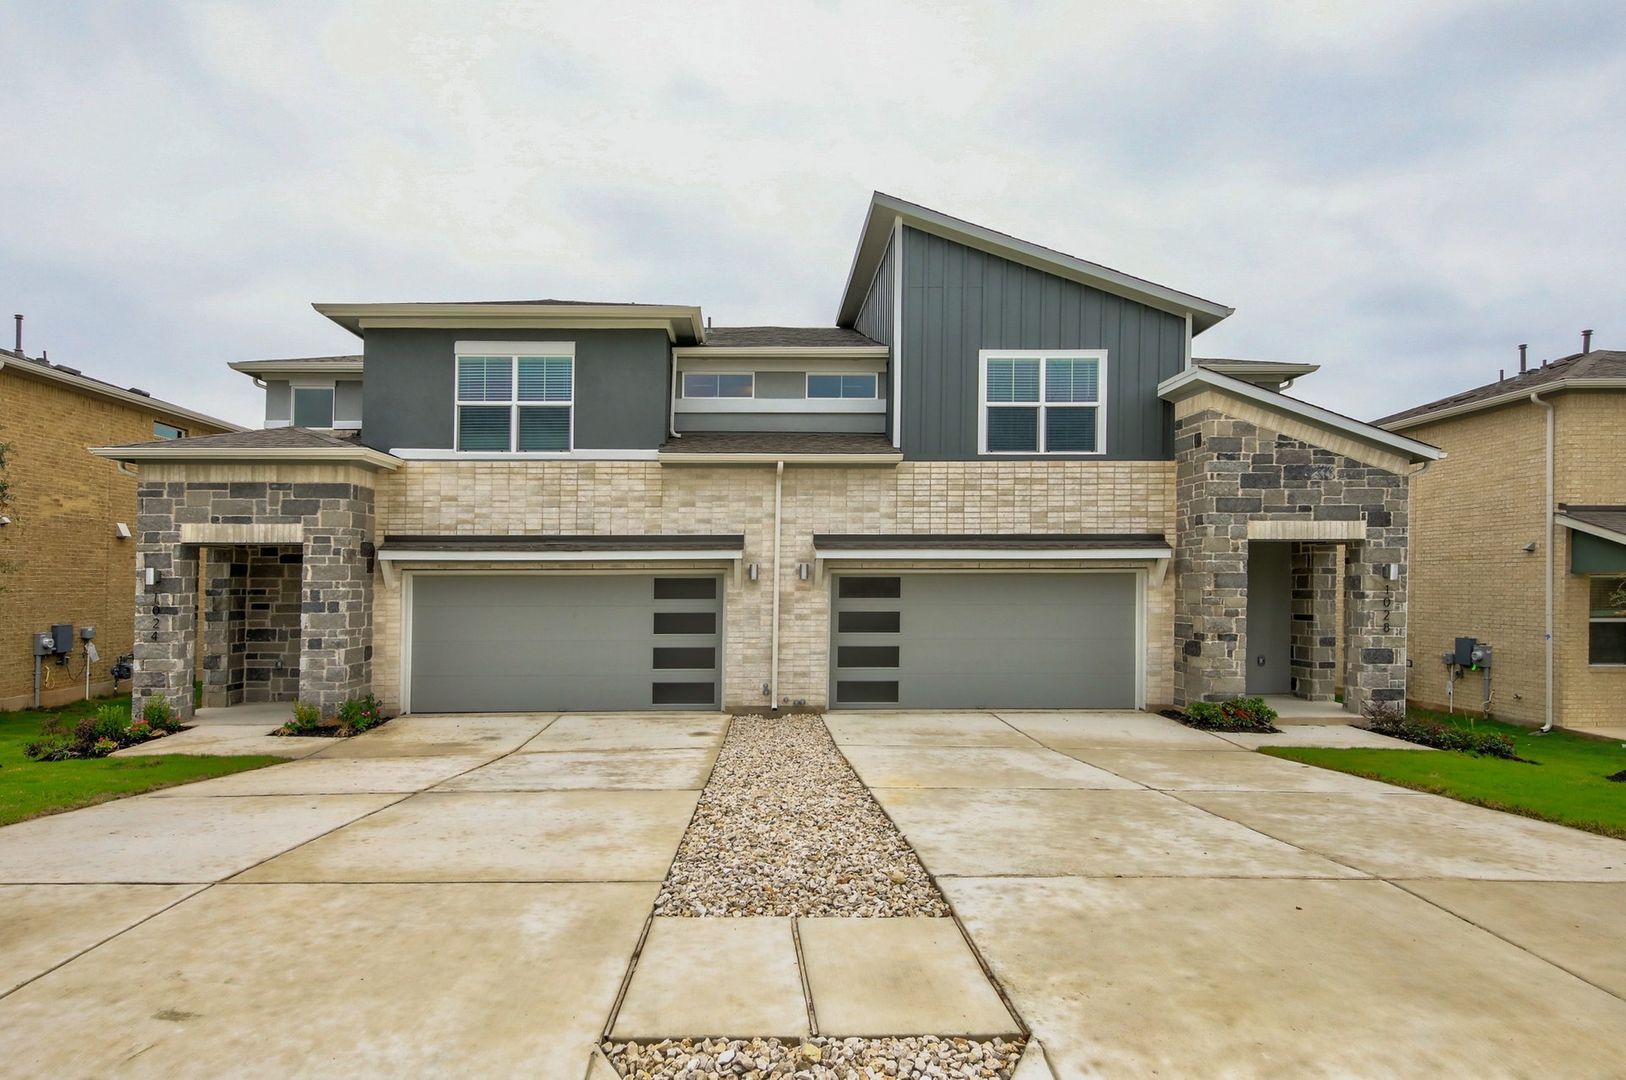 NEW TOWNHOME with 2 Car Garage & all the bells and whistles!